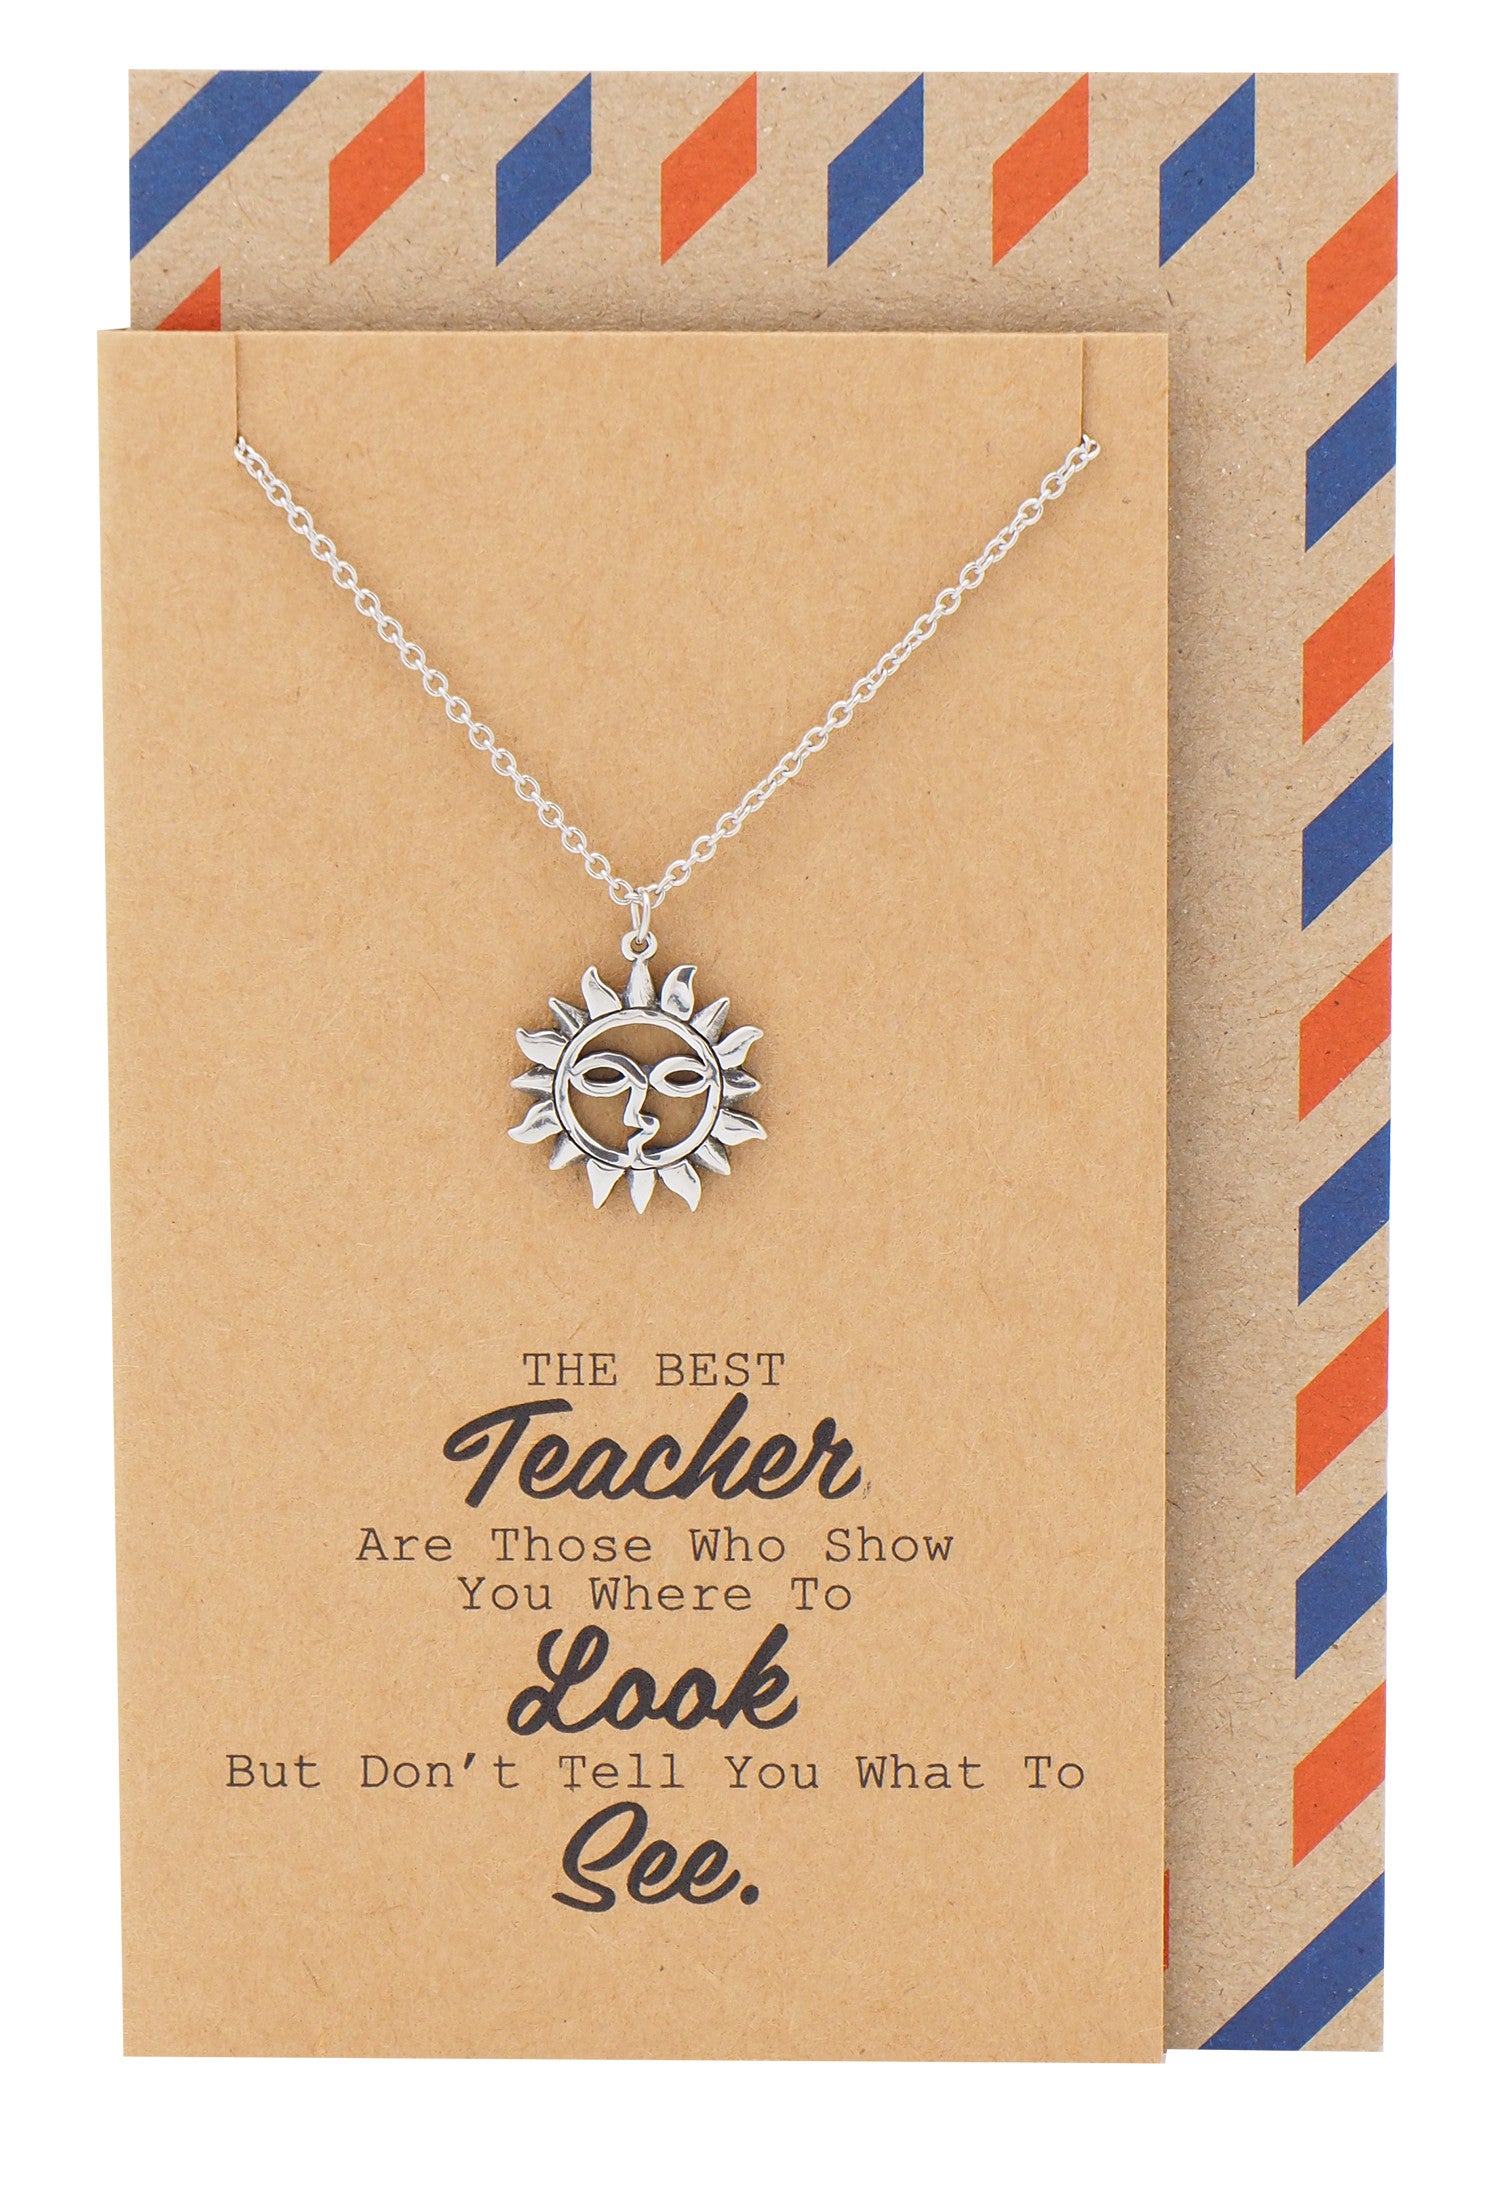 Brandi Teacher Quotes Gifts Sun Necklace and Thank You Cards